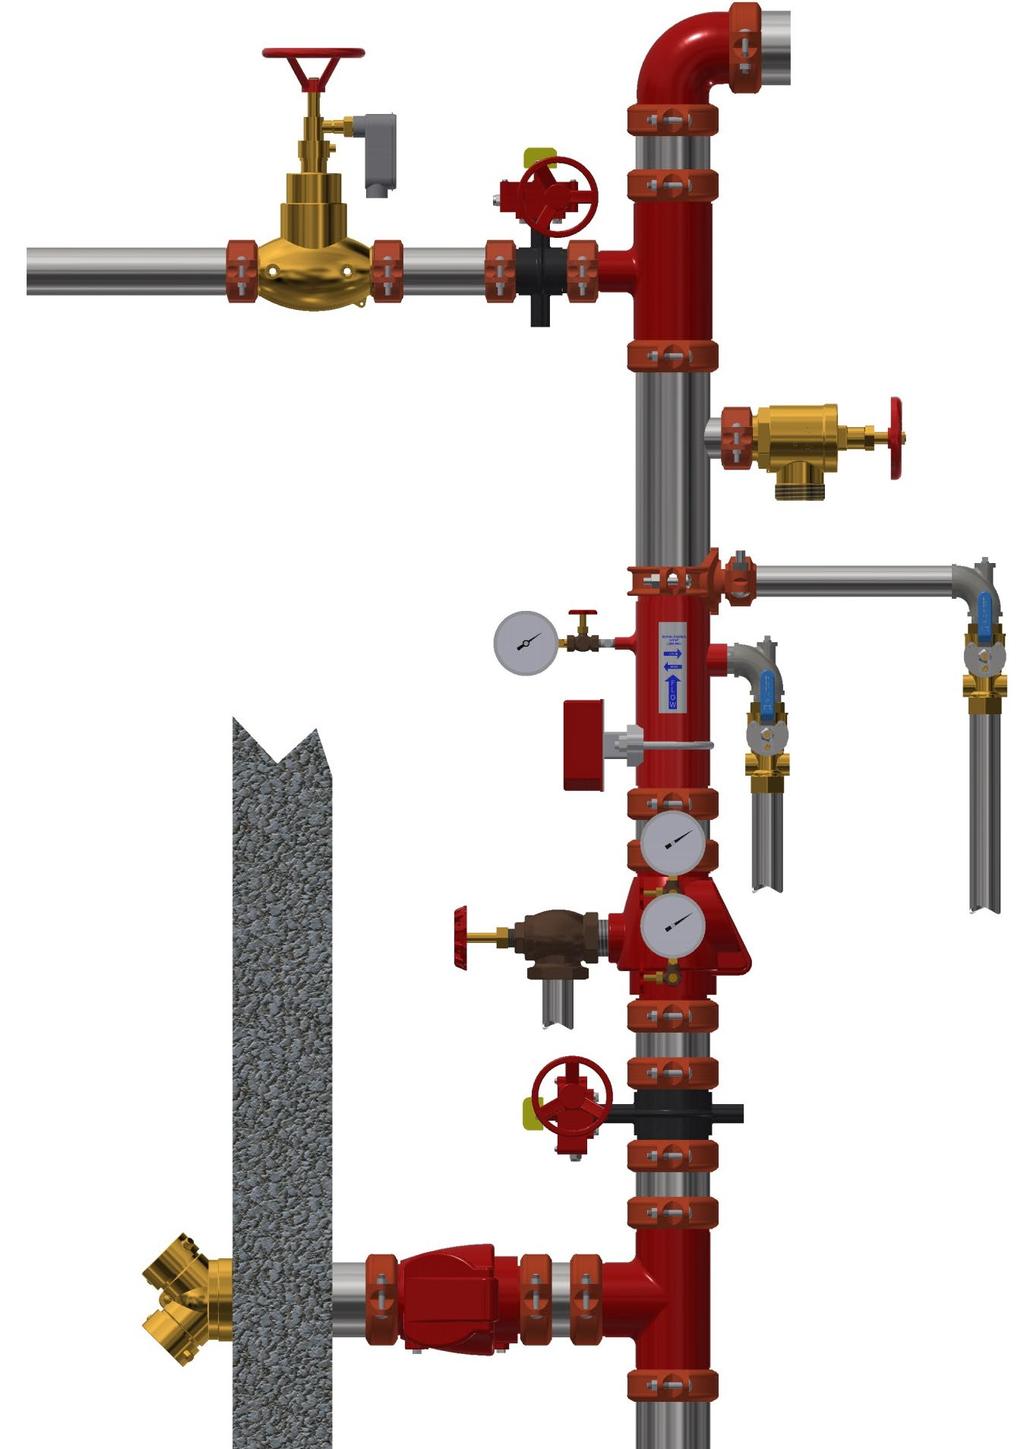 Zurn fire protection components wet standpipe systems Butterfly Valve Disclaimer for illustrative purposes only, not a typical system! 13.